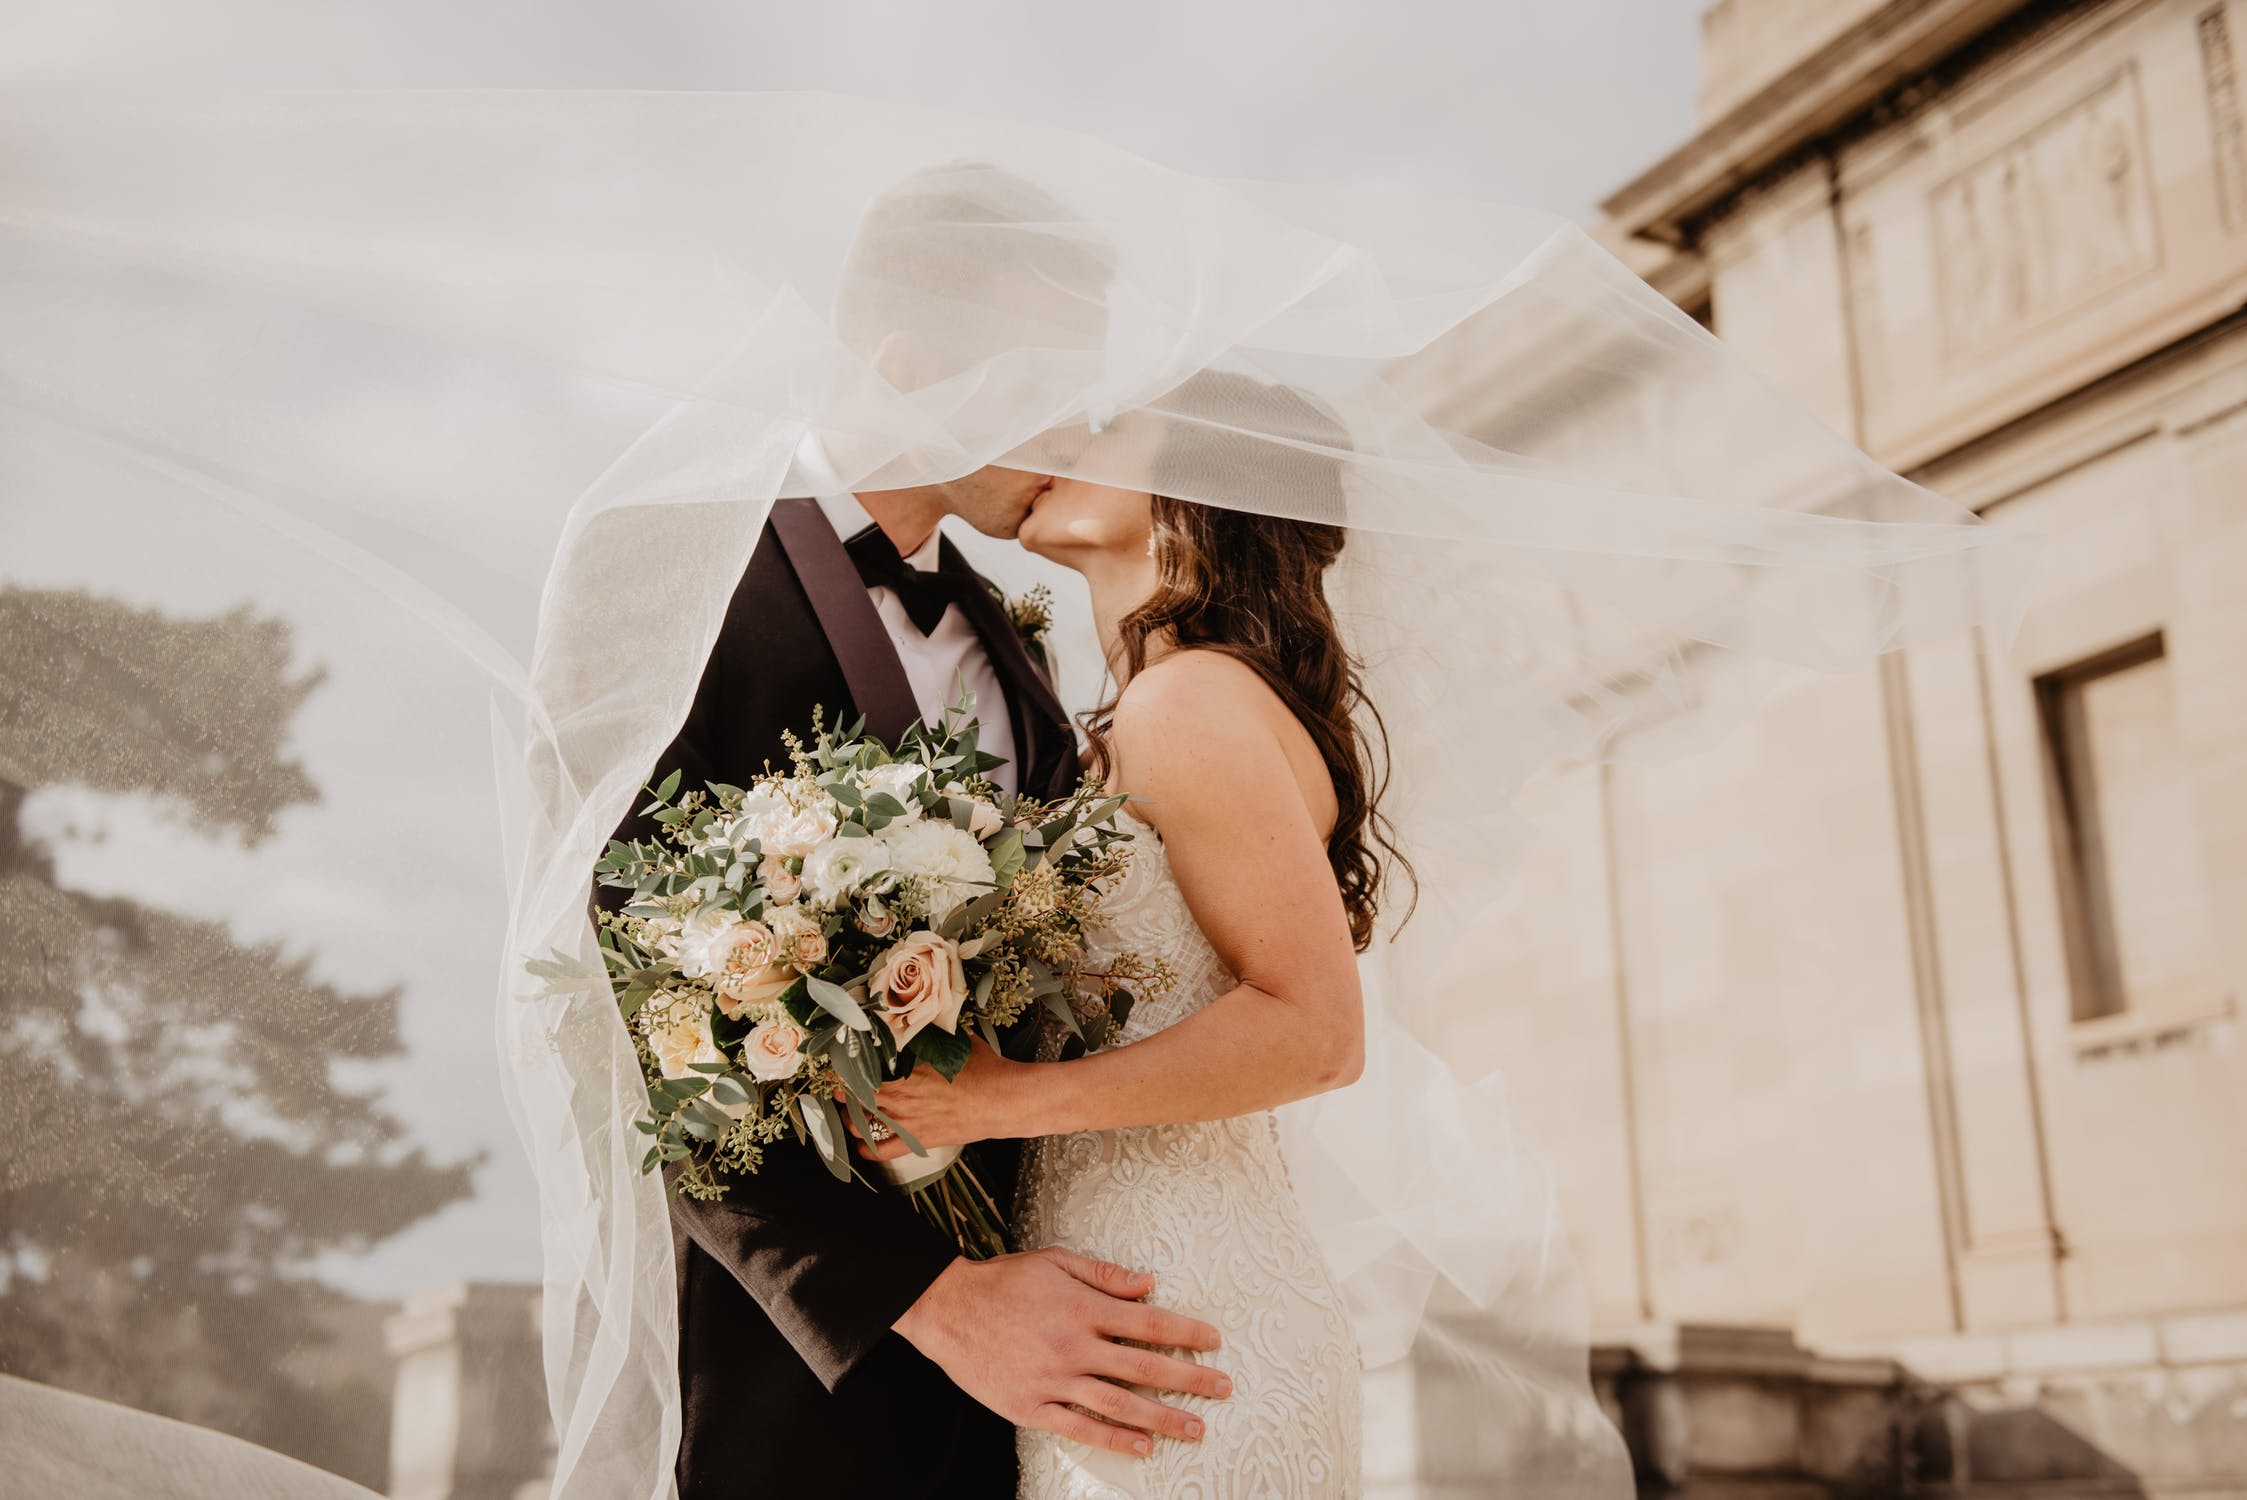 Charlotte and Jack married three weeks after they met | Source: Unsplash